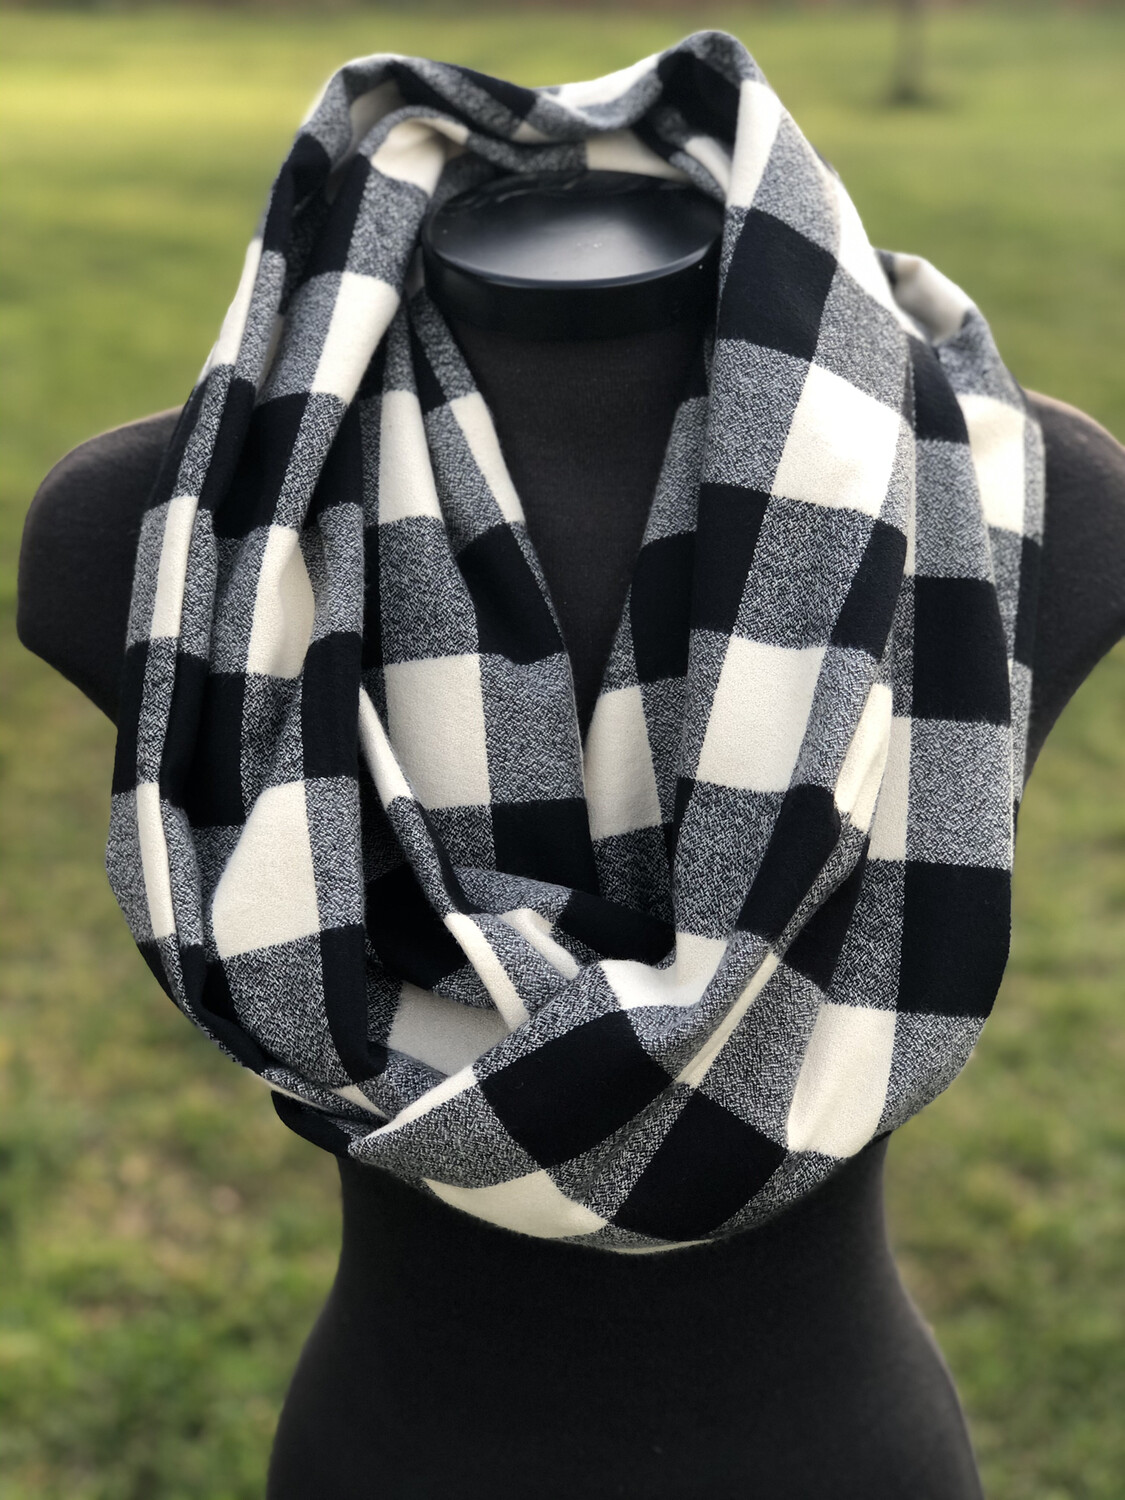 Mammoth Check  Ivory & Black  Infinity Scarf with Hidden Pocket! (Flannel)